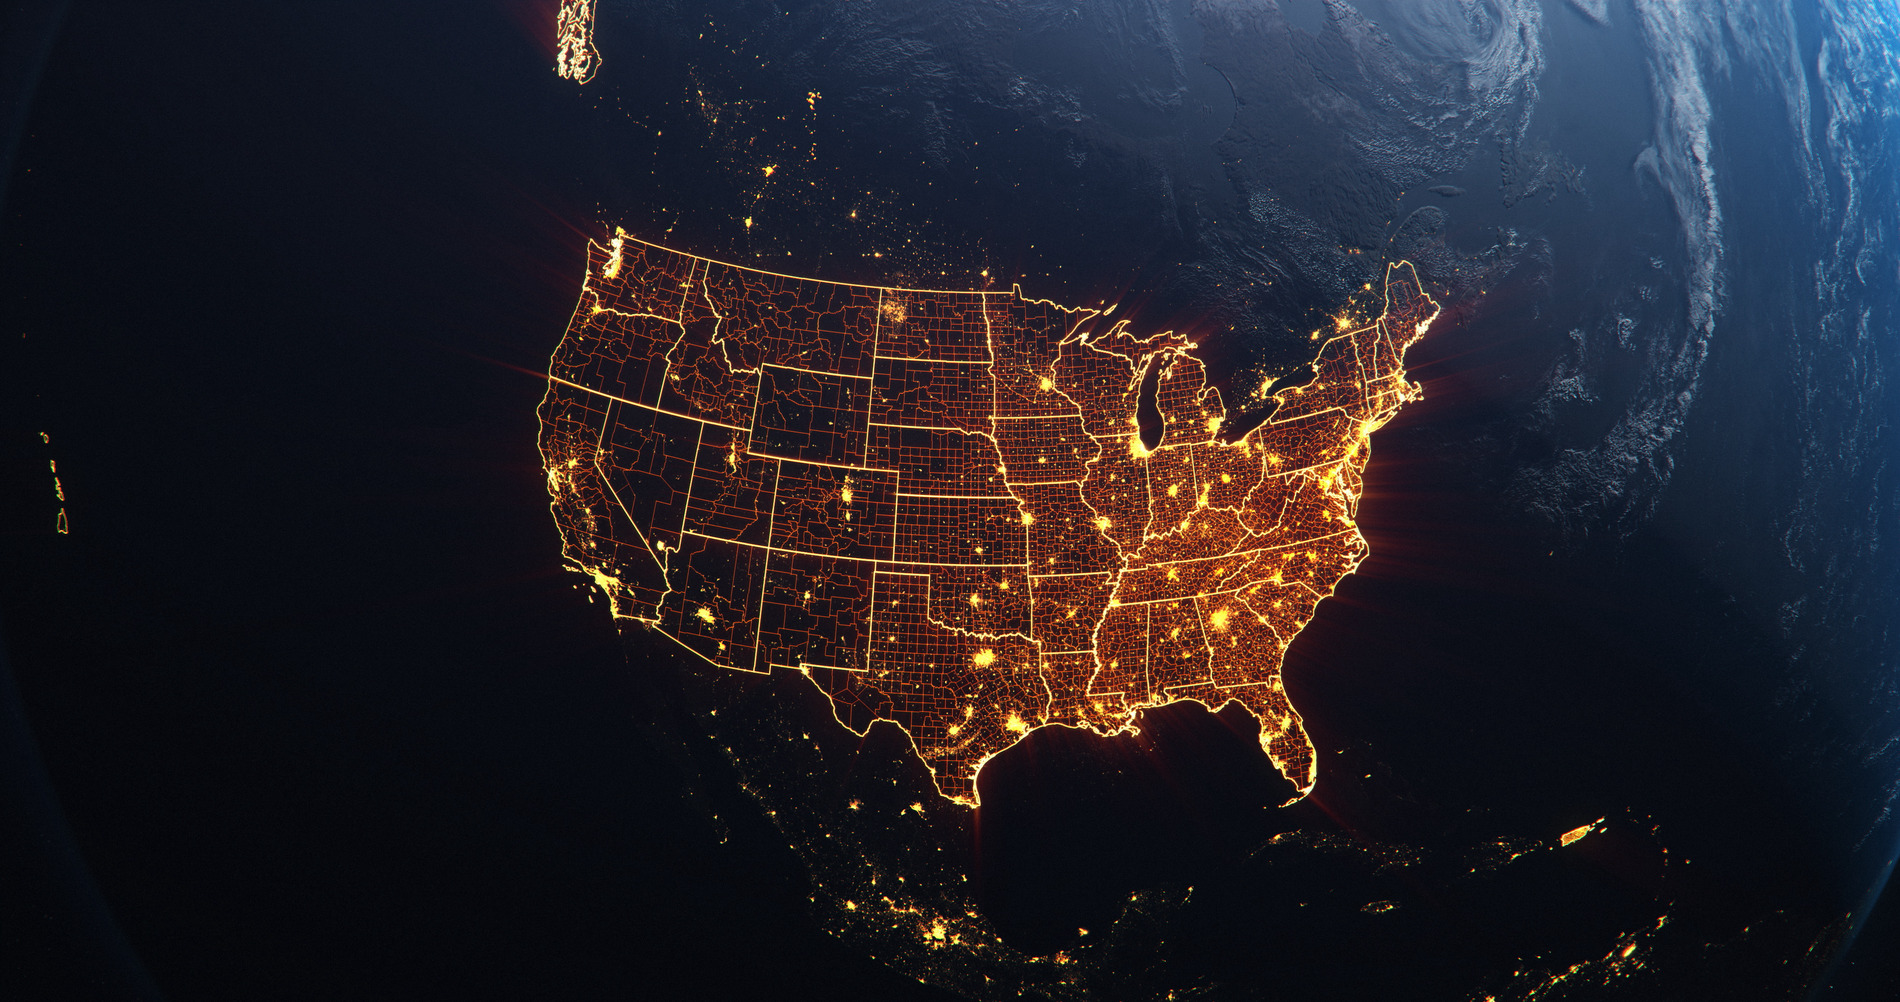 The United States outlined to look lit up with points around the map lit up